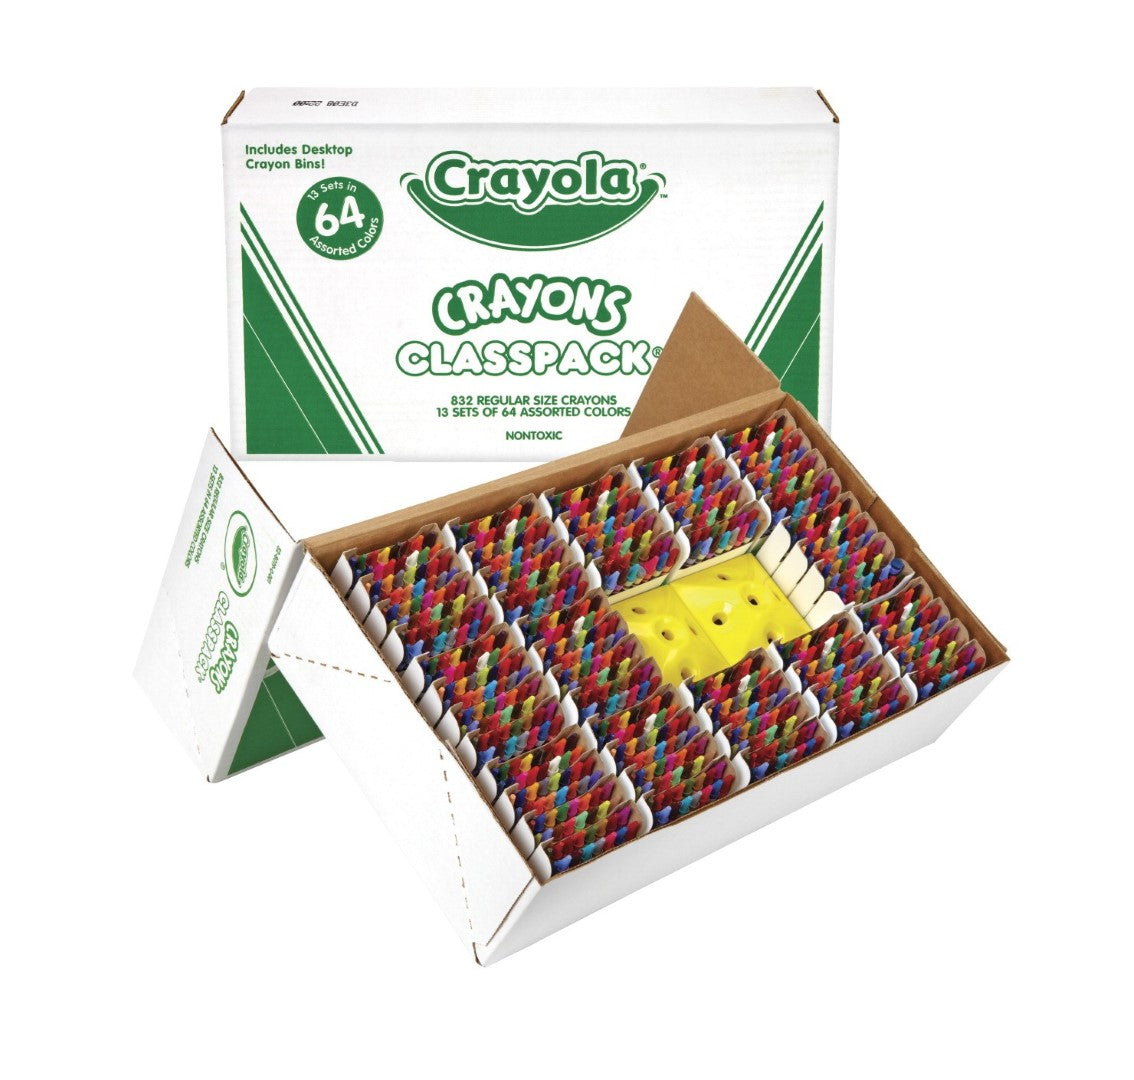 Crayola Standard Crayon Classroom Pack, 8 Assorted Colors, Pack of 800